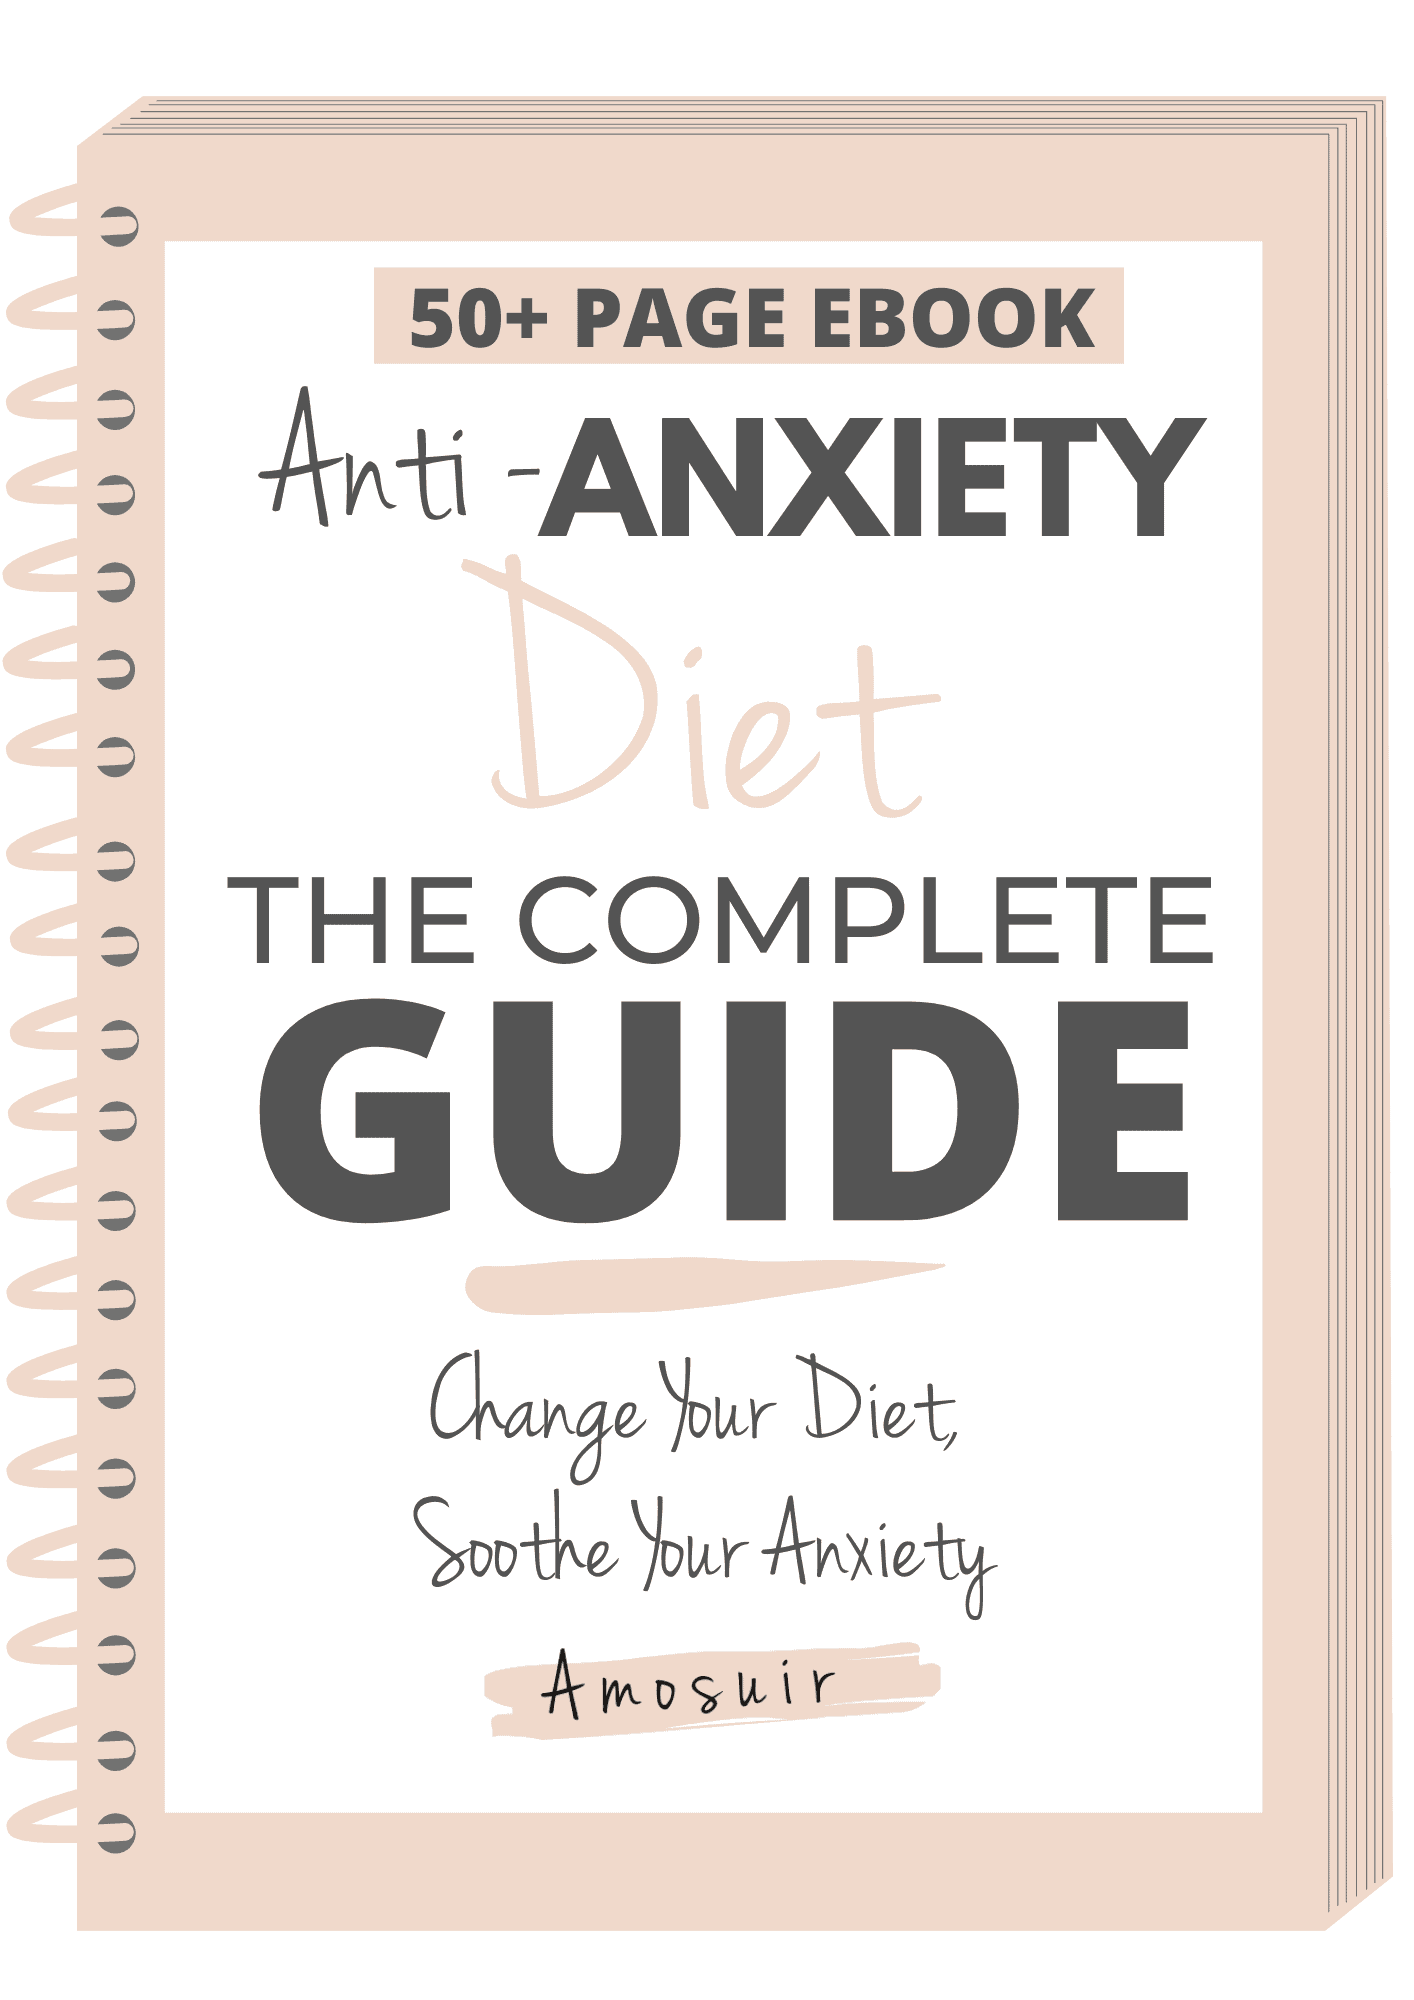 Anti-anxiety diet guide front cover 